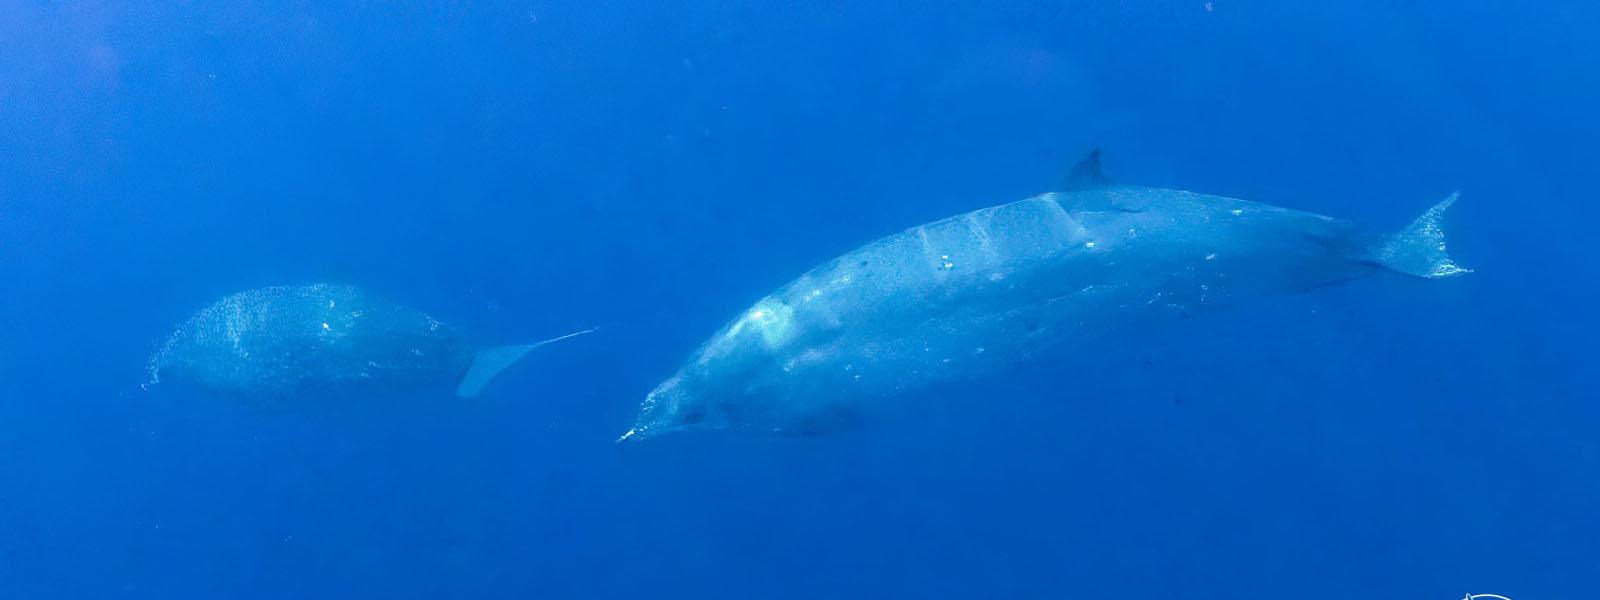 New whale species discovered in Mexico